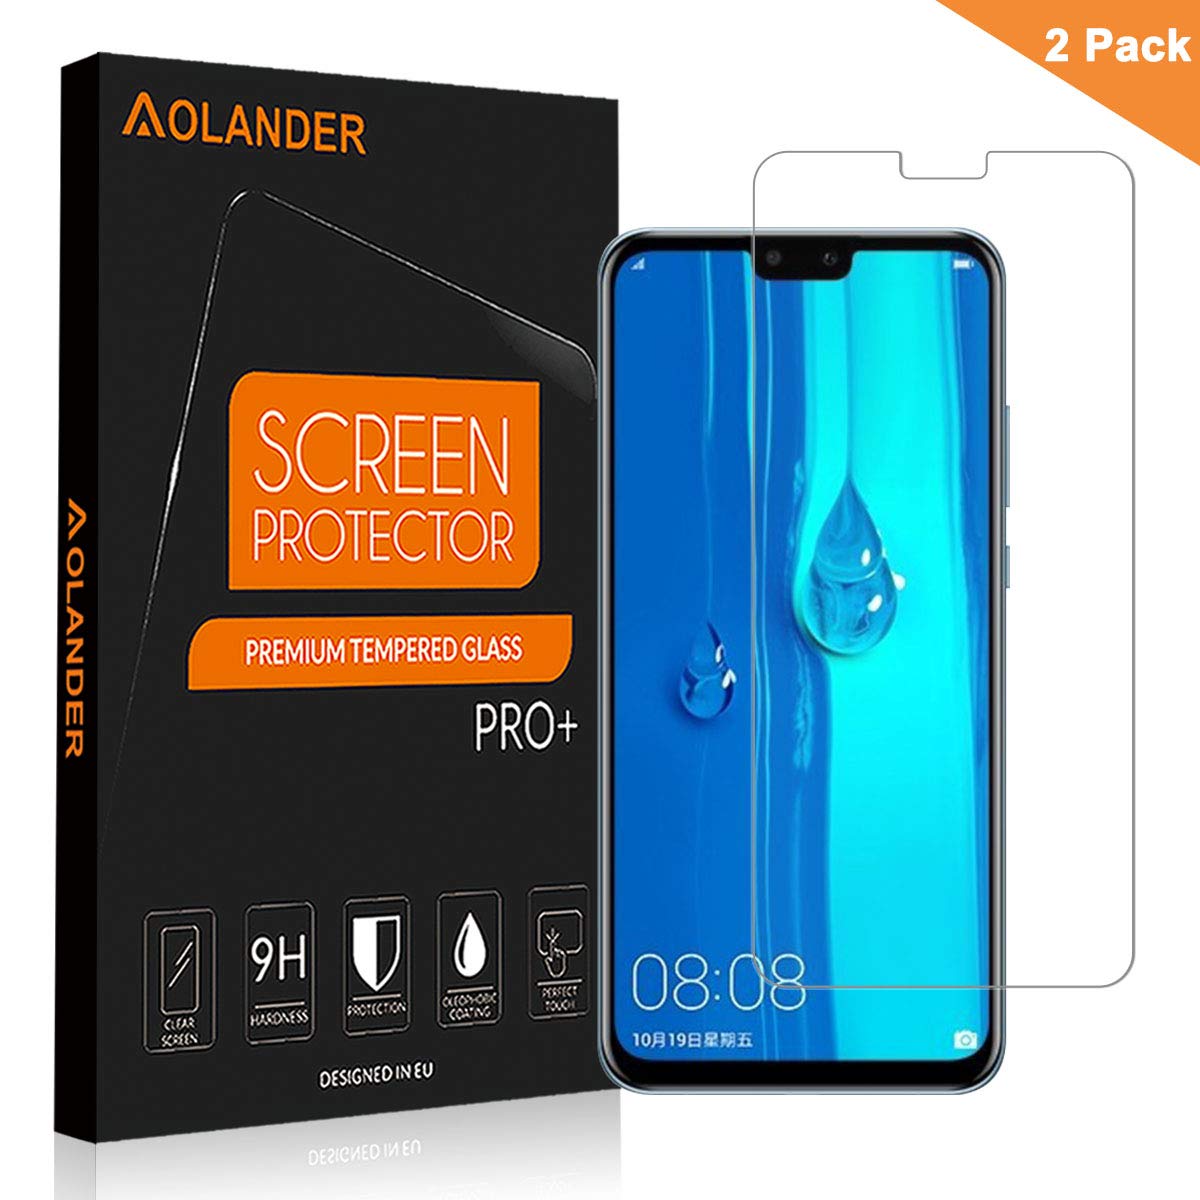 UNEXTATI Screen Protector Film 2 Pack HD Clear Tempered Glass Film for Huawei Y9 2019 Tempered Glass Screen Protector Compatible with Y9 2019 